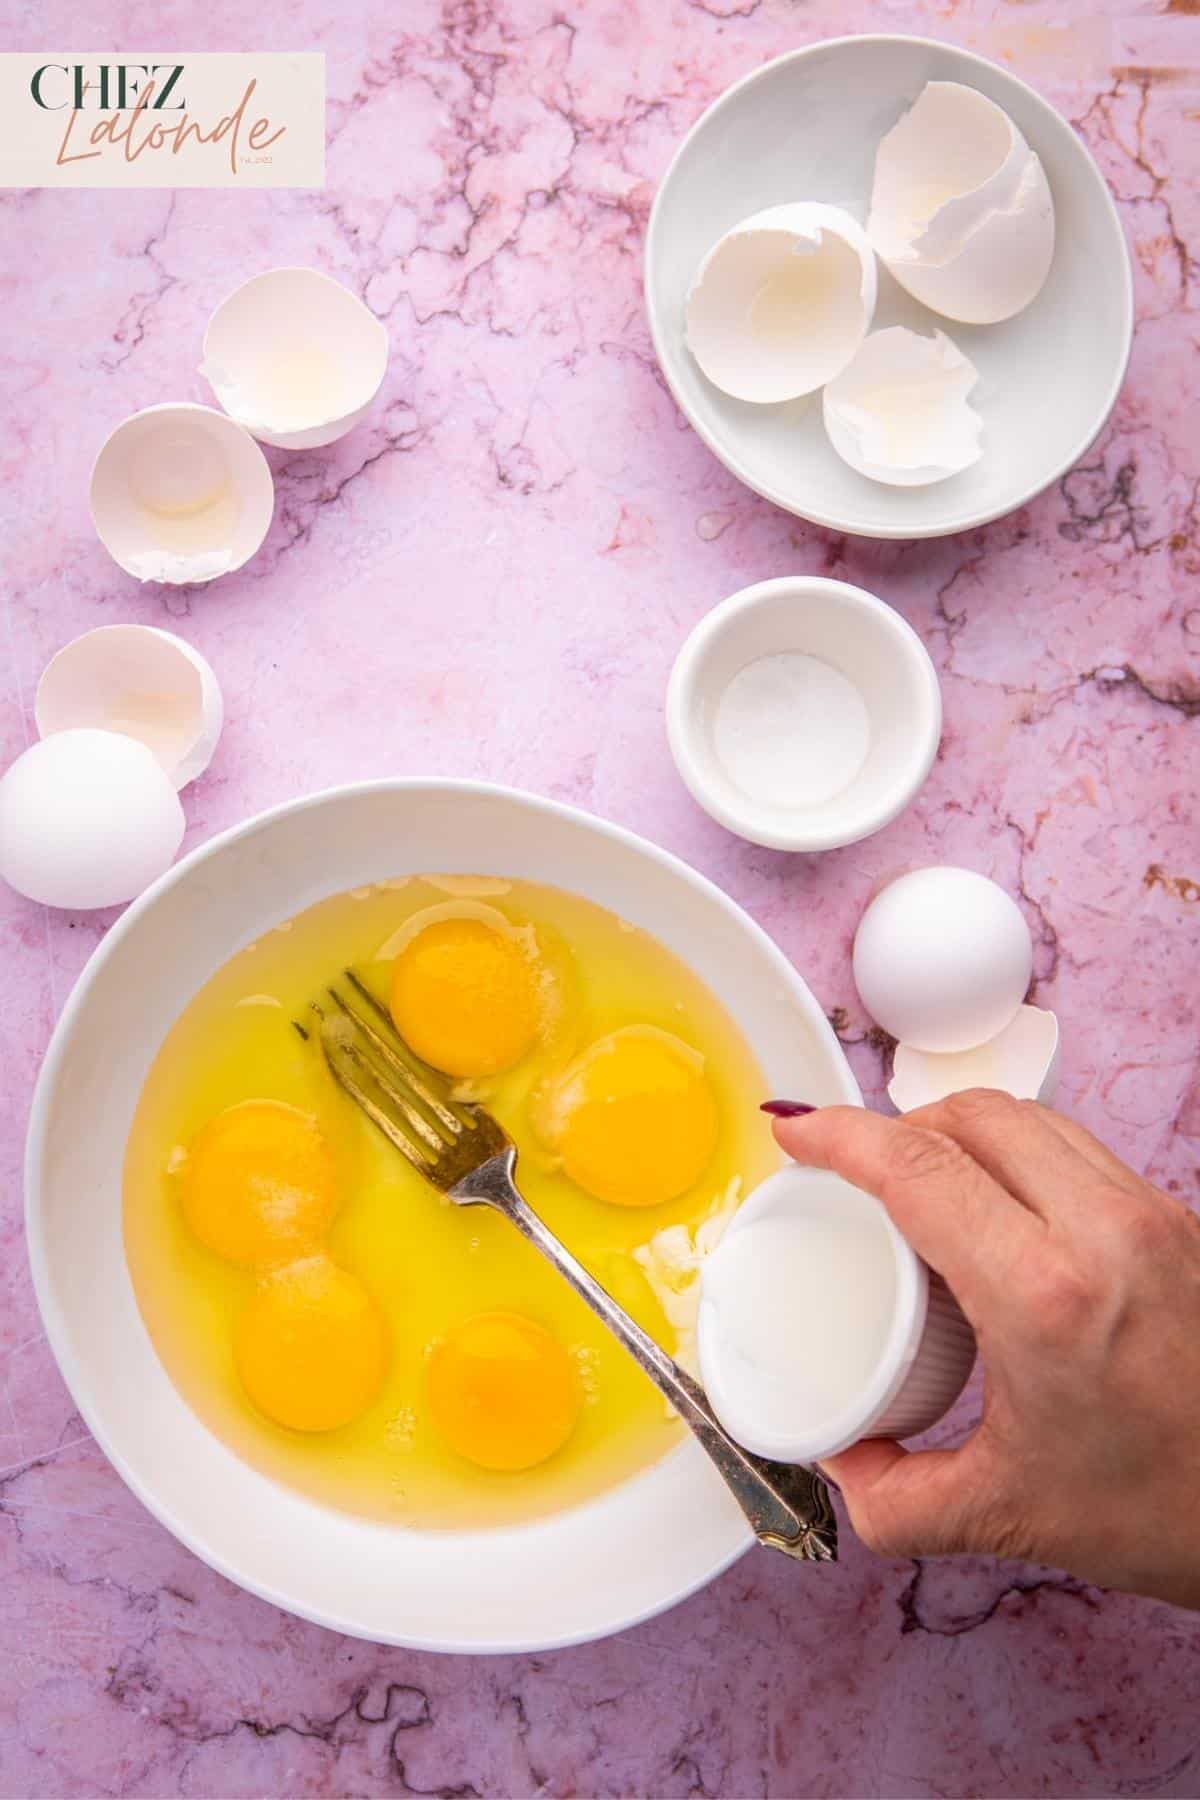 Crack five eggs into a small bowl, then add 1 tablespoon of milk and ½ teaspoon sea salt. 